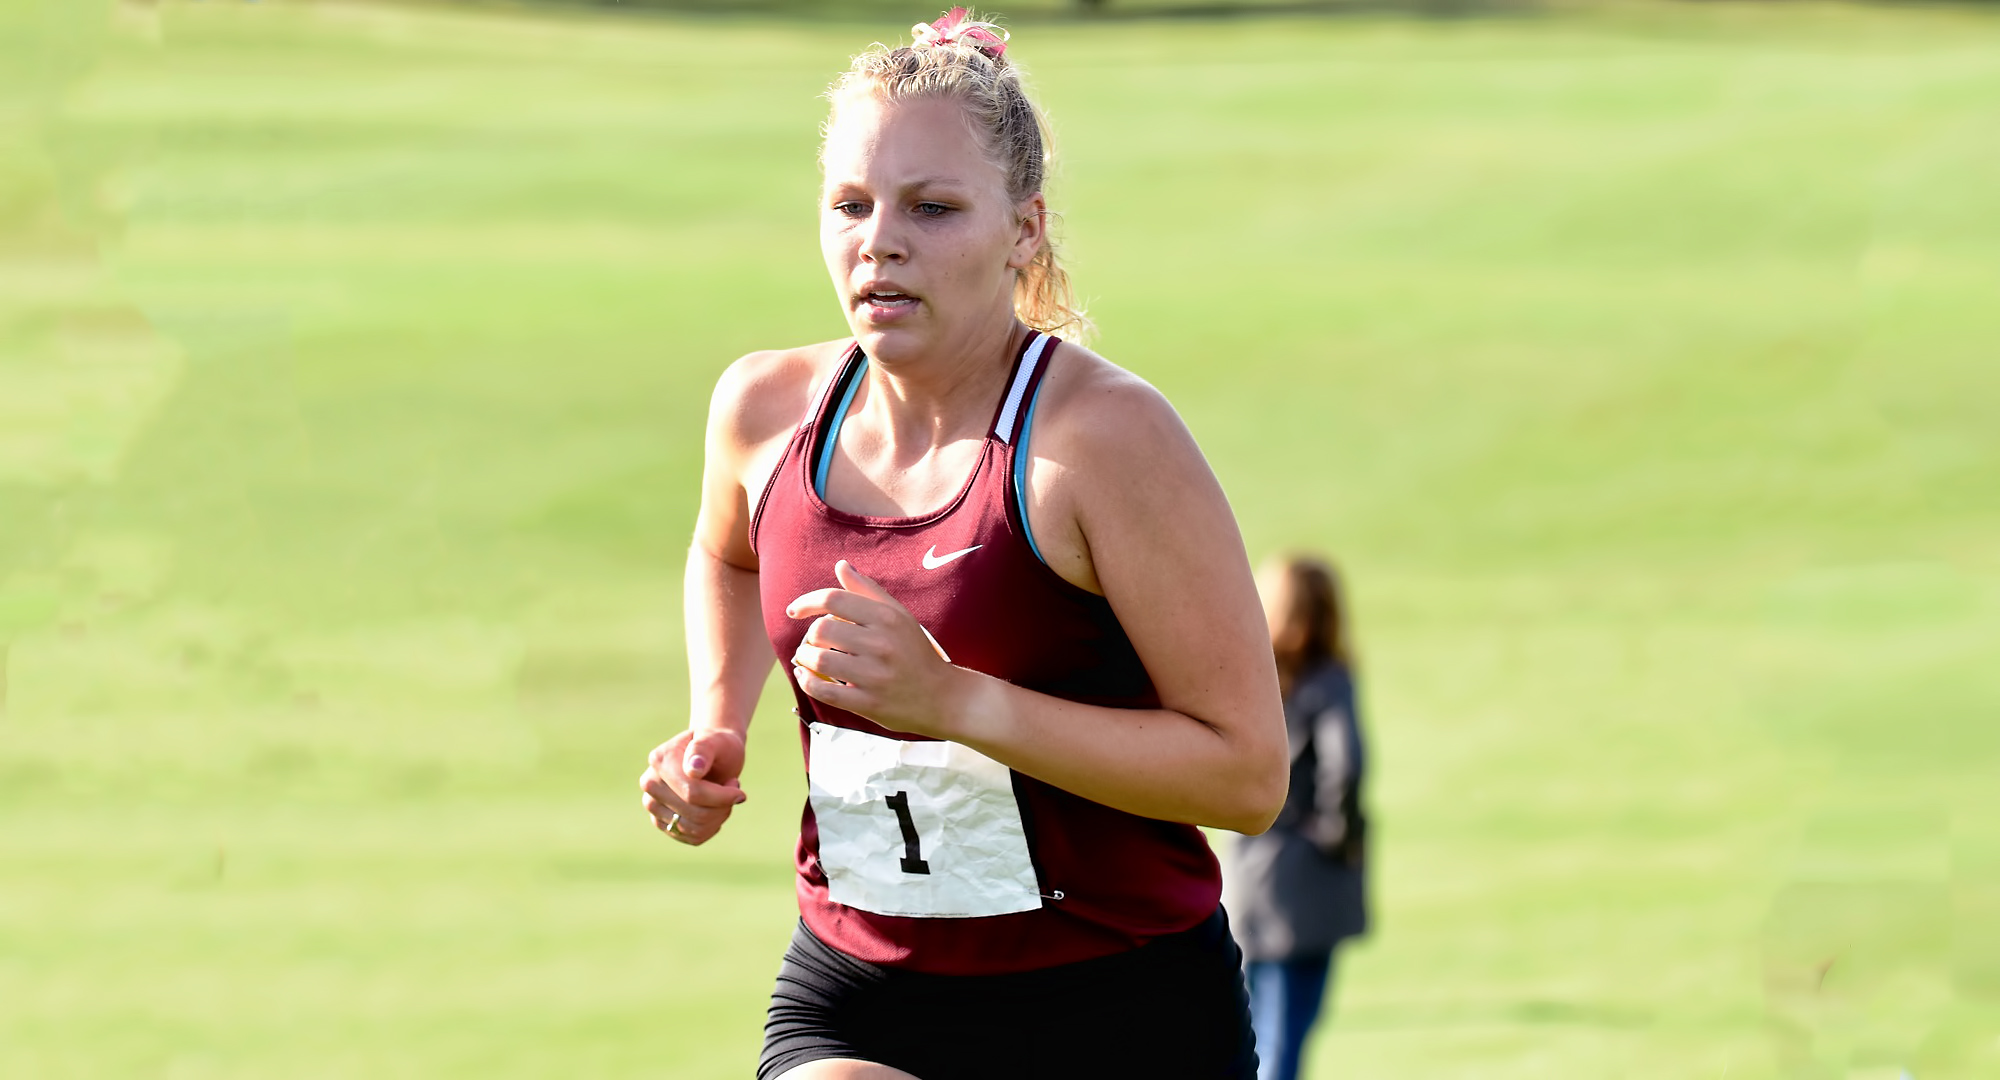 Senior Kara Andersen has her sights set on a Top 5 team finish at the MIAC Meet as well as All-Conference and All-Region honors.